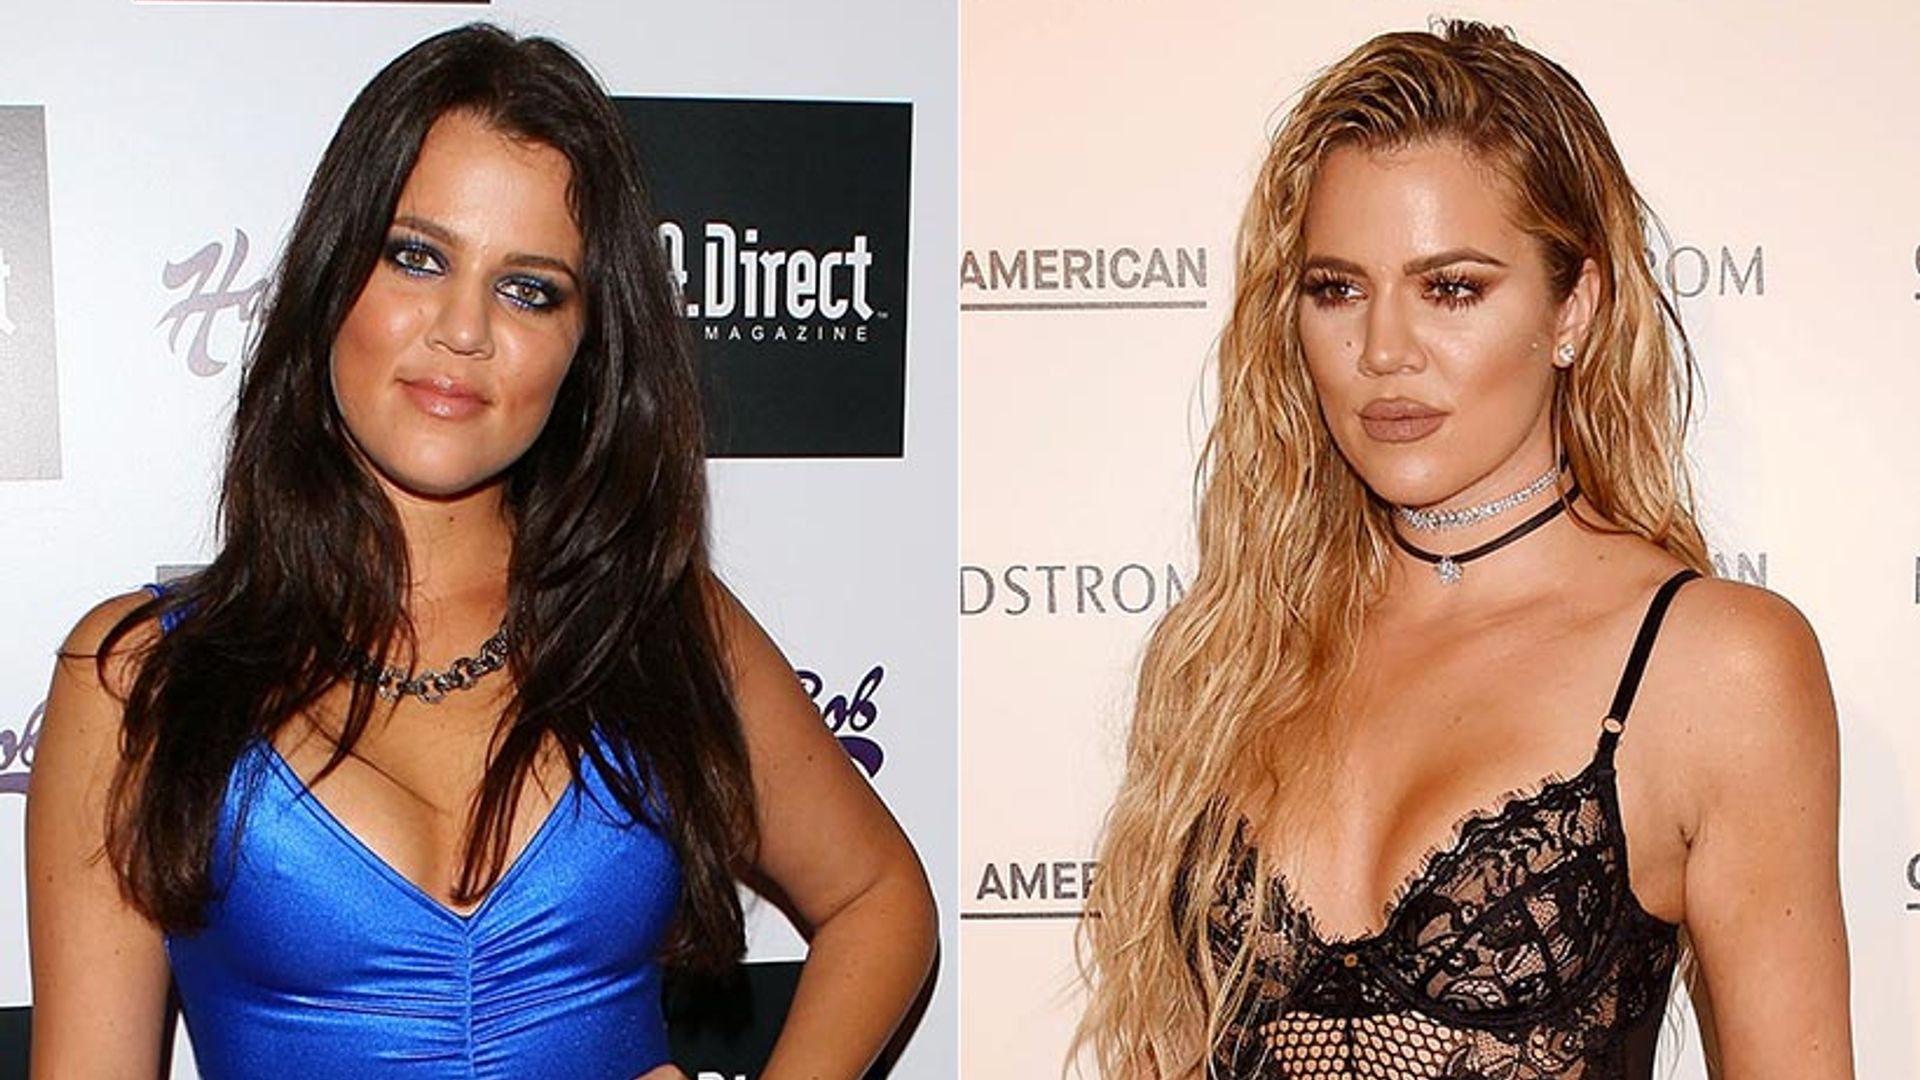 khlo-kardashian-reflects-on-her-body-transformation-ahead-of-new-show